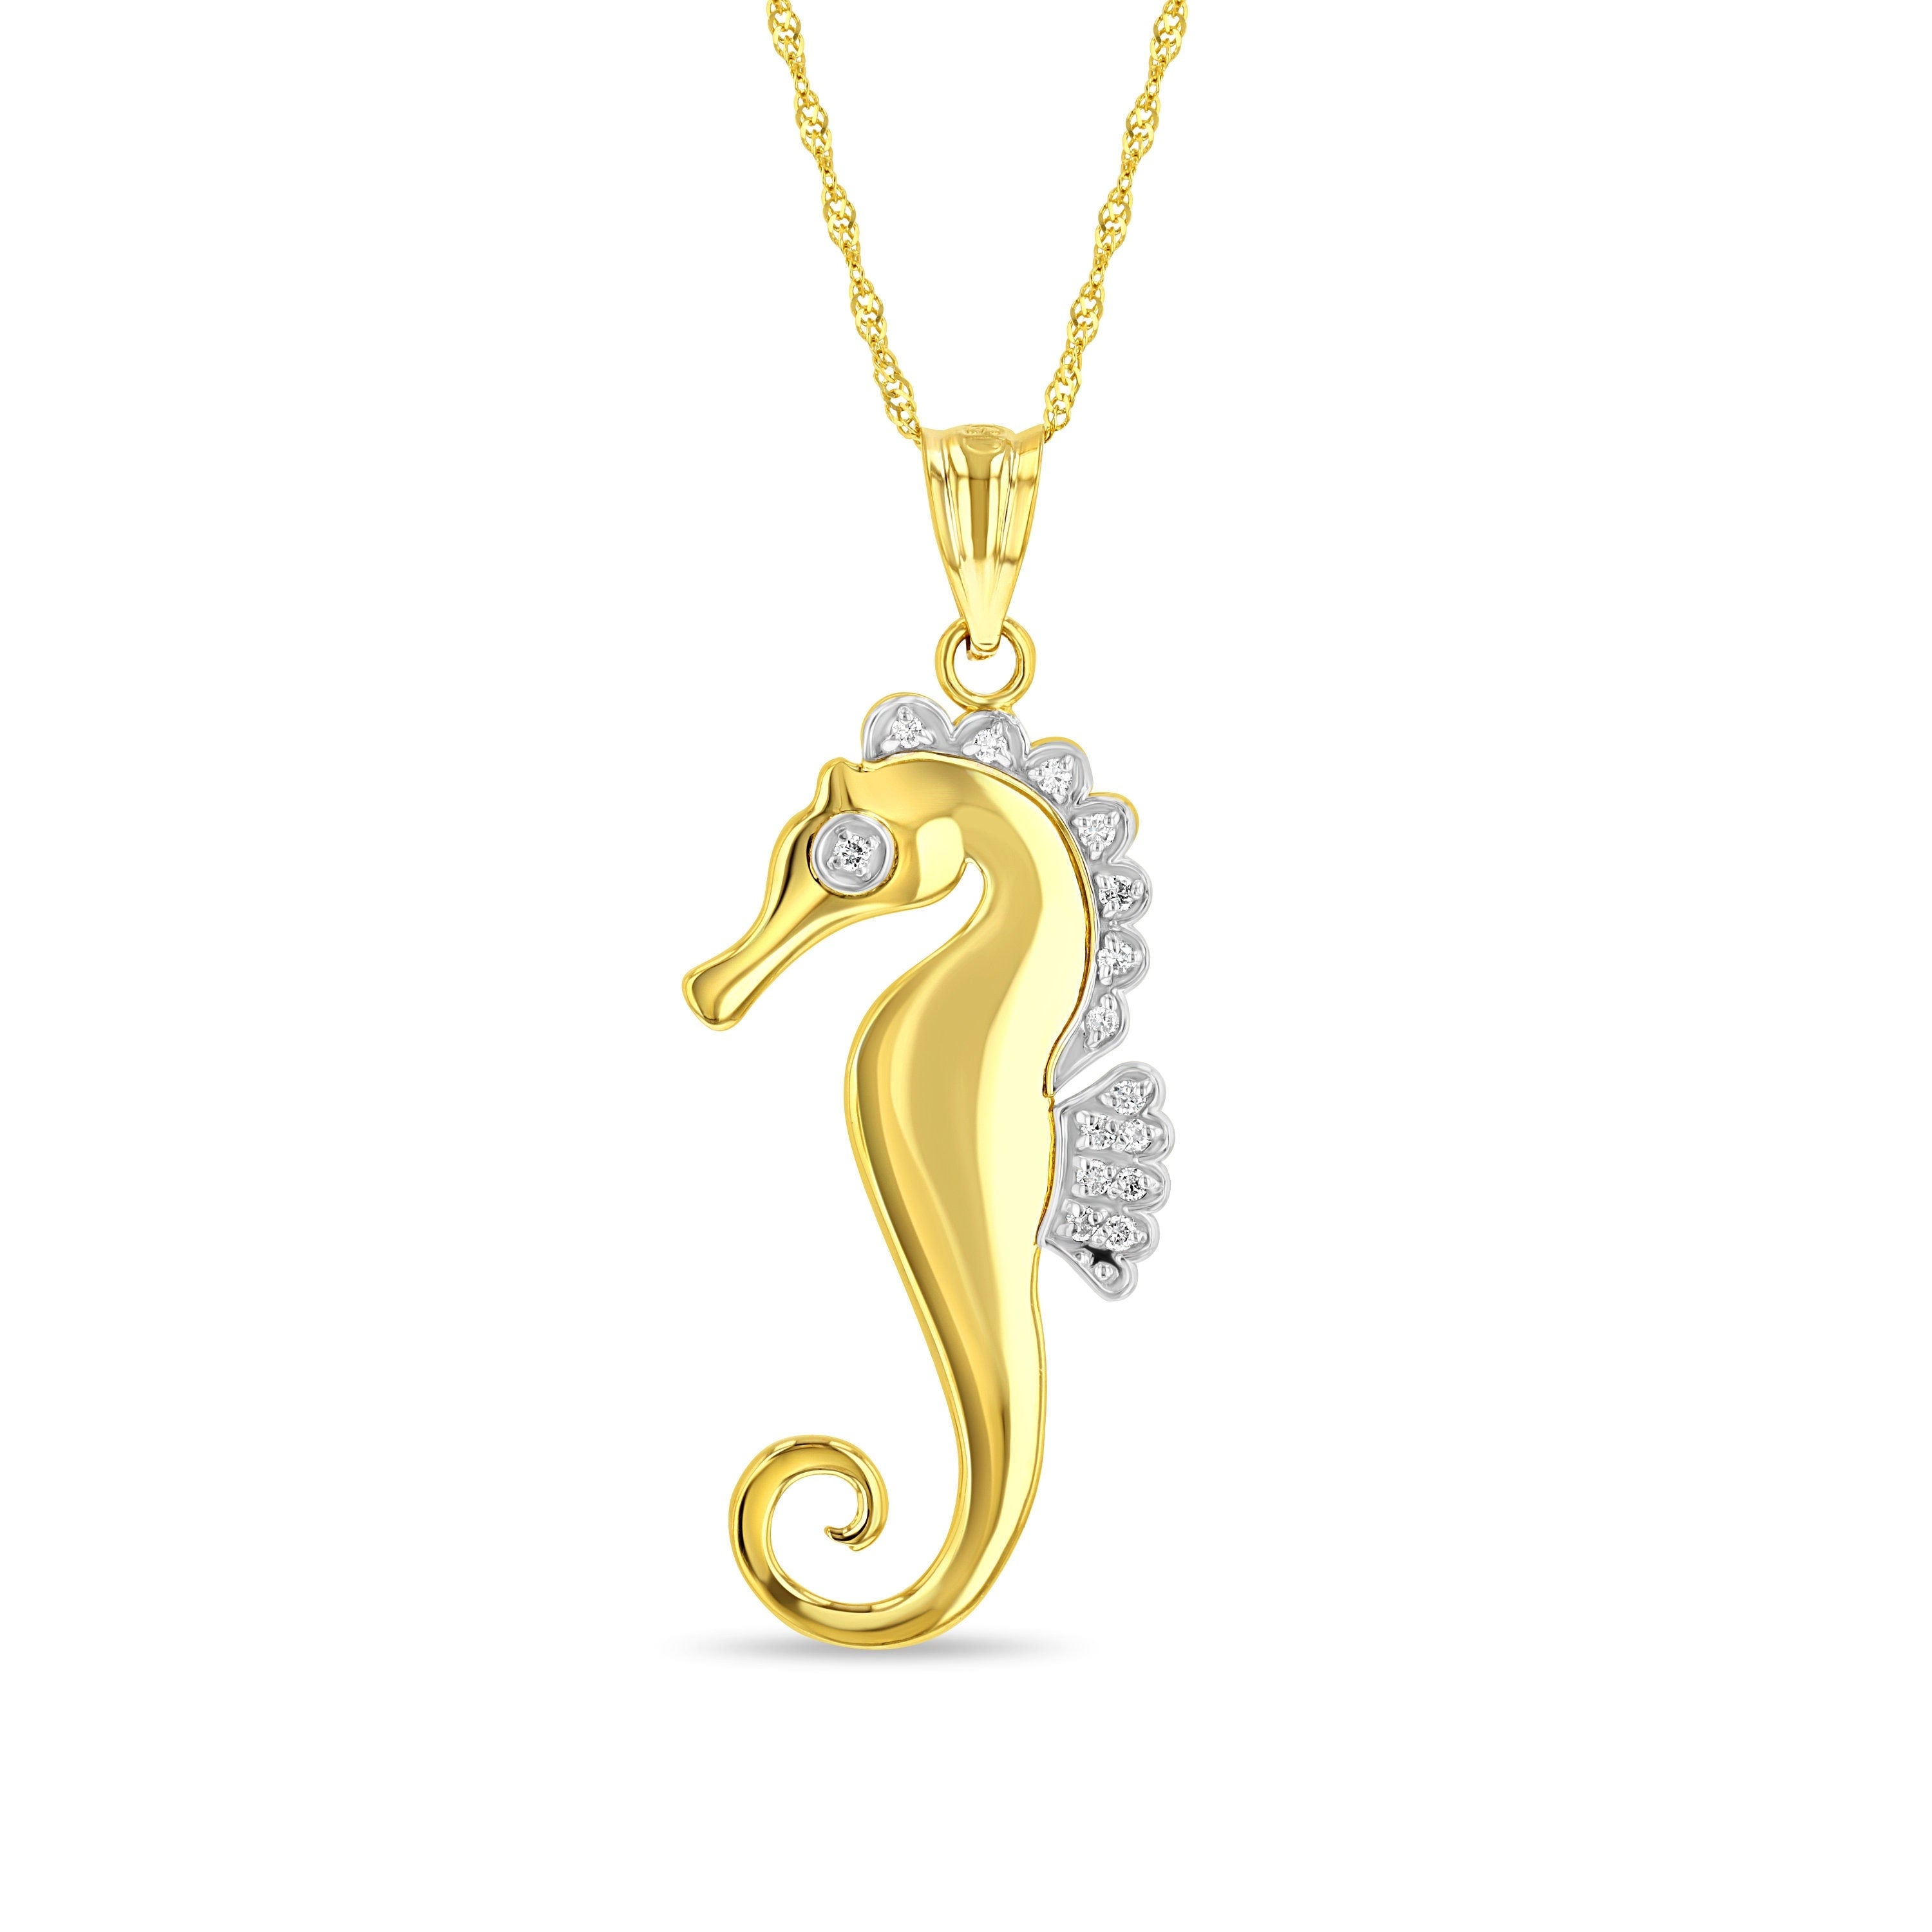 14k solid gold two tone diamond sea horse pendant on 18" solid gold chain